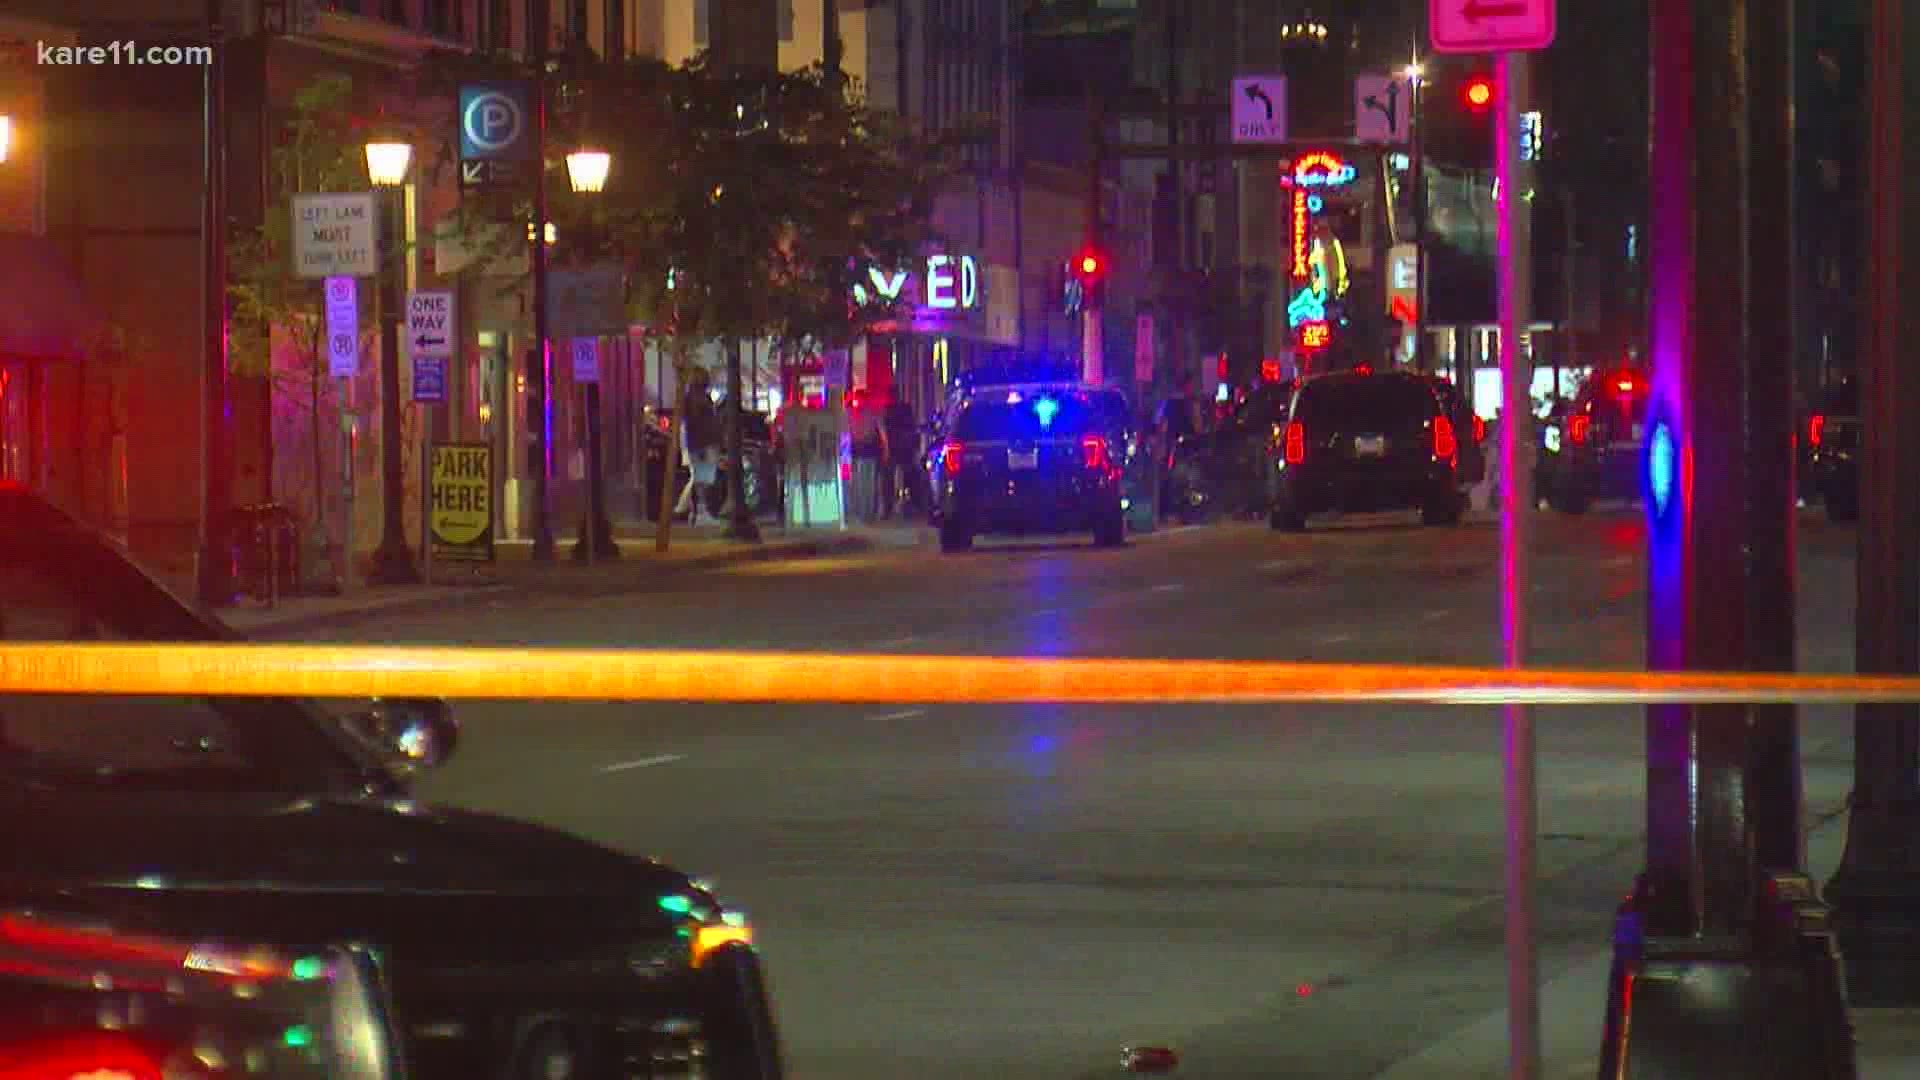 Minneapolis police are investigating after 12 people were shot early Sunday morning in Uptown.